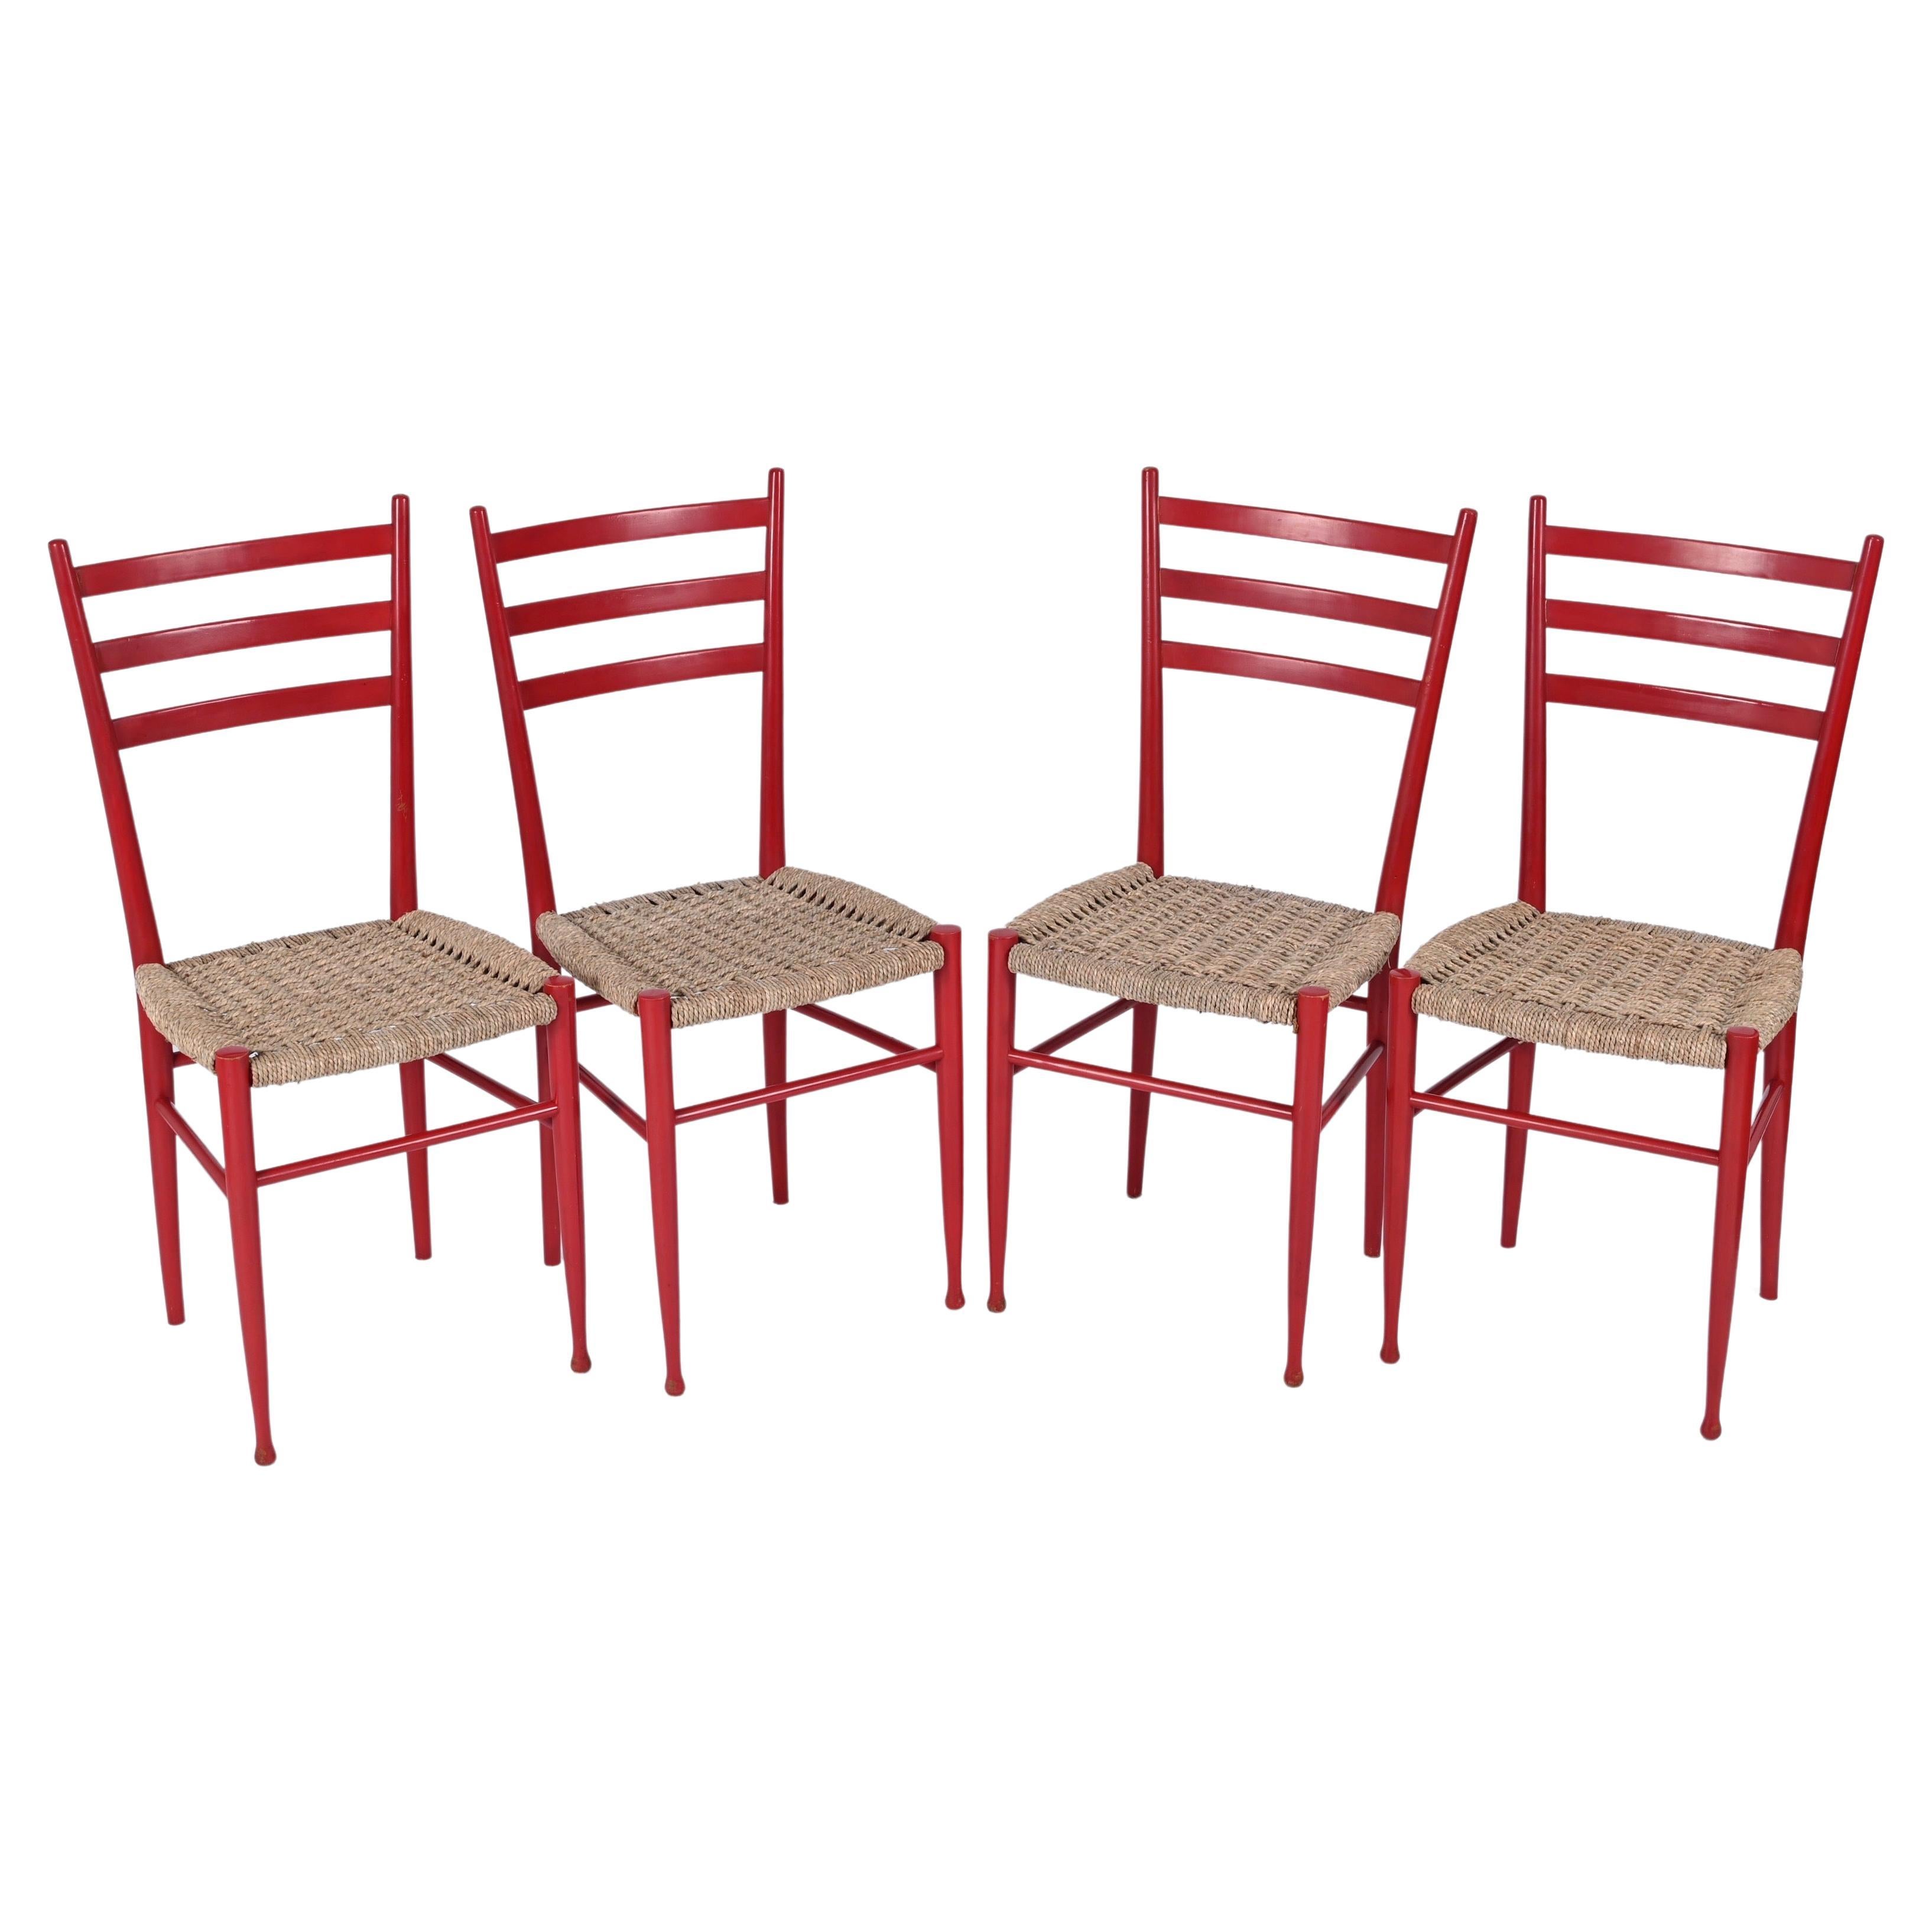 Set of 4 Chiavarine Chairs in Red Stained Beech and Bamboo Rope, Italy 1950s For Sale 8